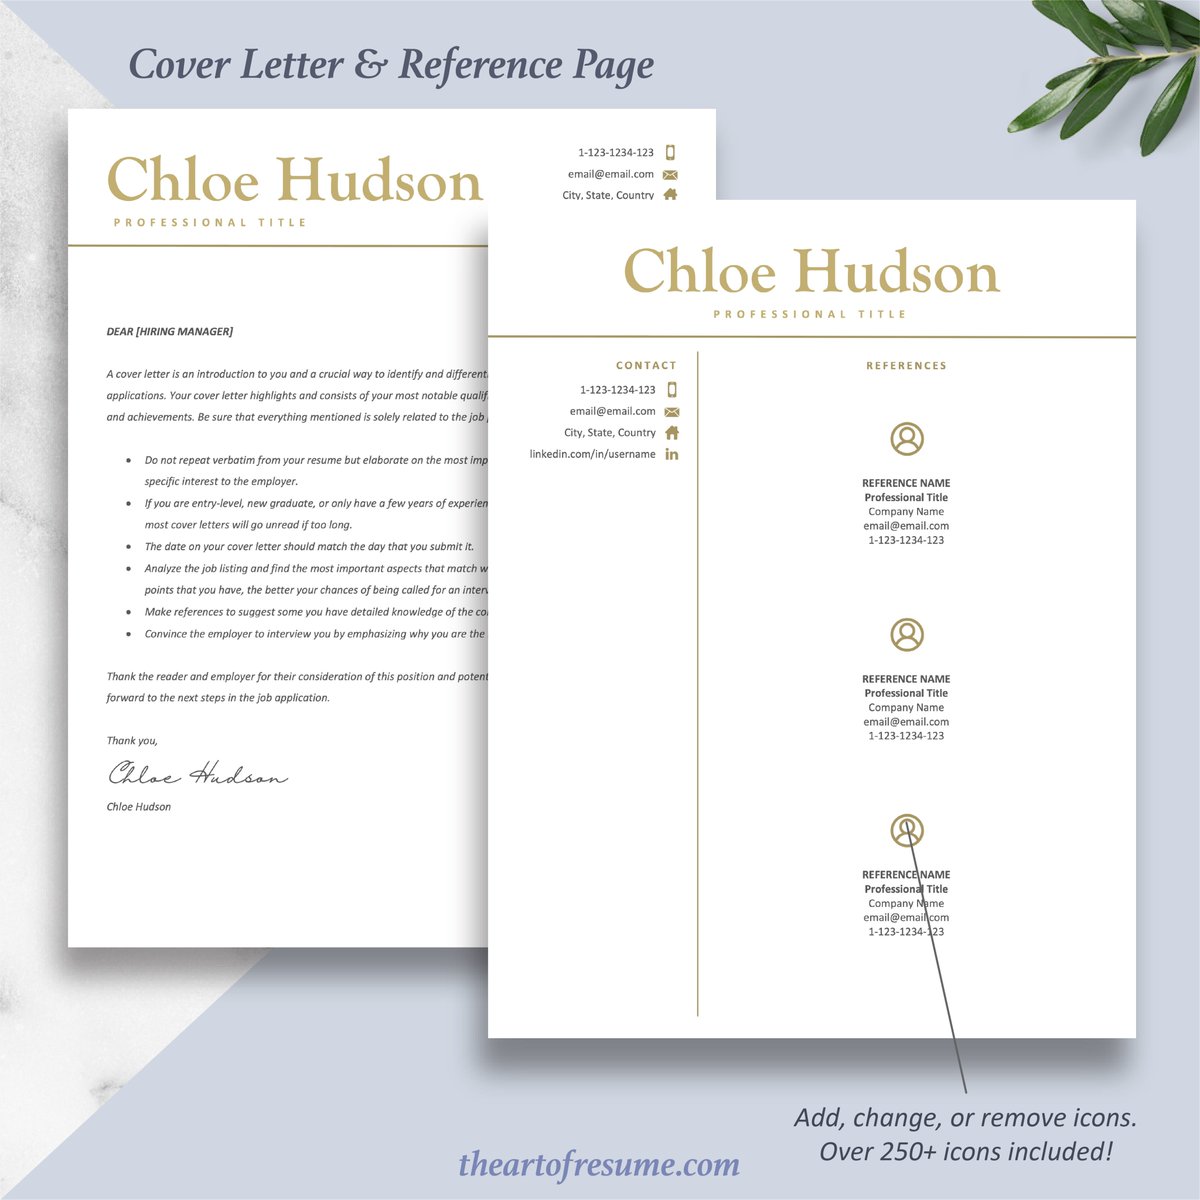 Make applying for work easy, with The Art of Resume. One of our most popular designs.

Download yours today!

Free resume with code: 2FOR1

etsy.com/ca/listing/674…

#resume #jobinterview #resumetemplate #inspiration #cv #curriculumvitae